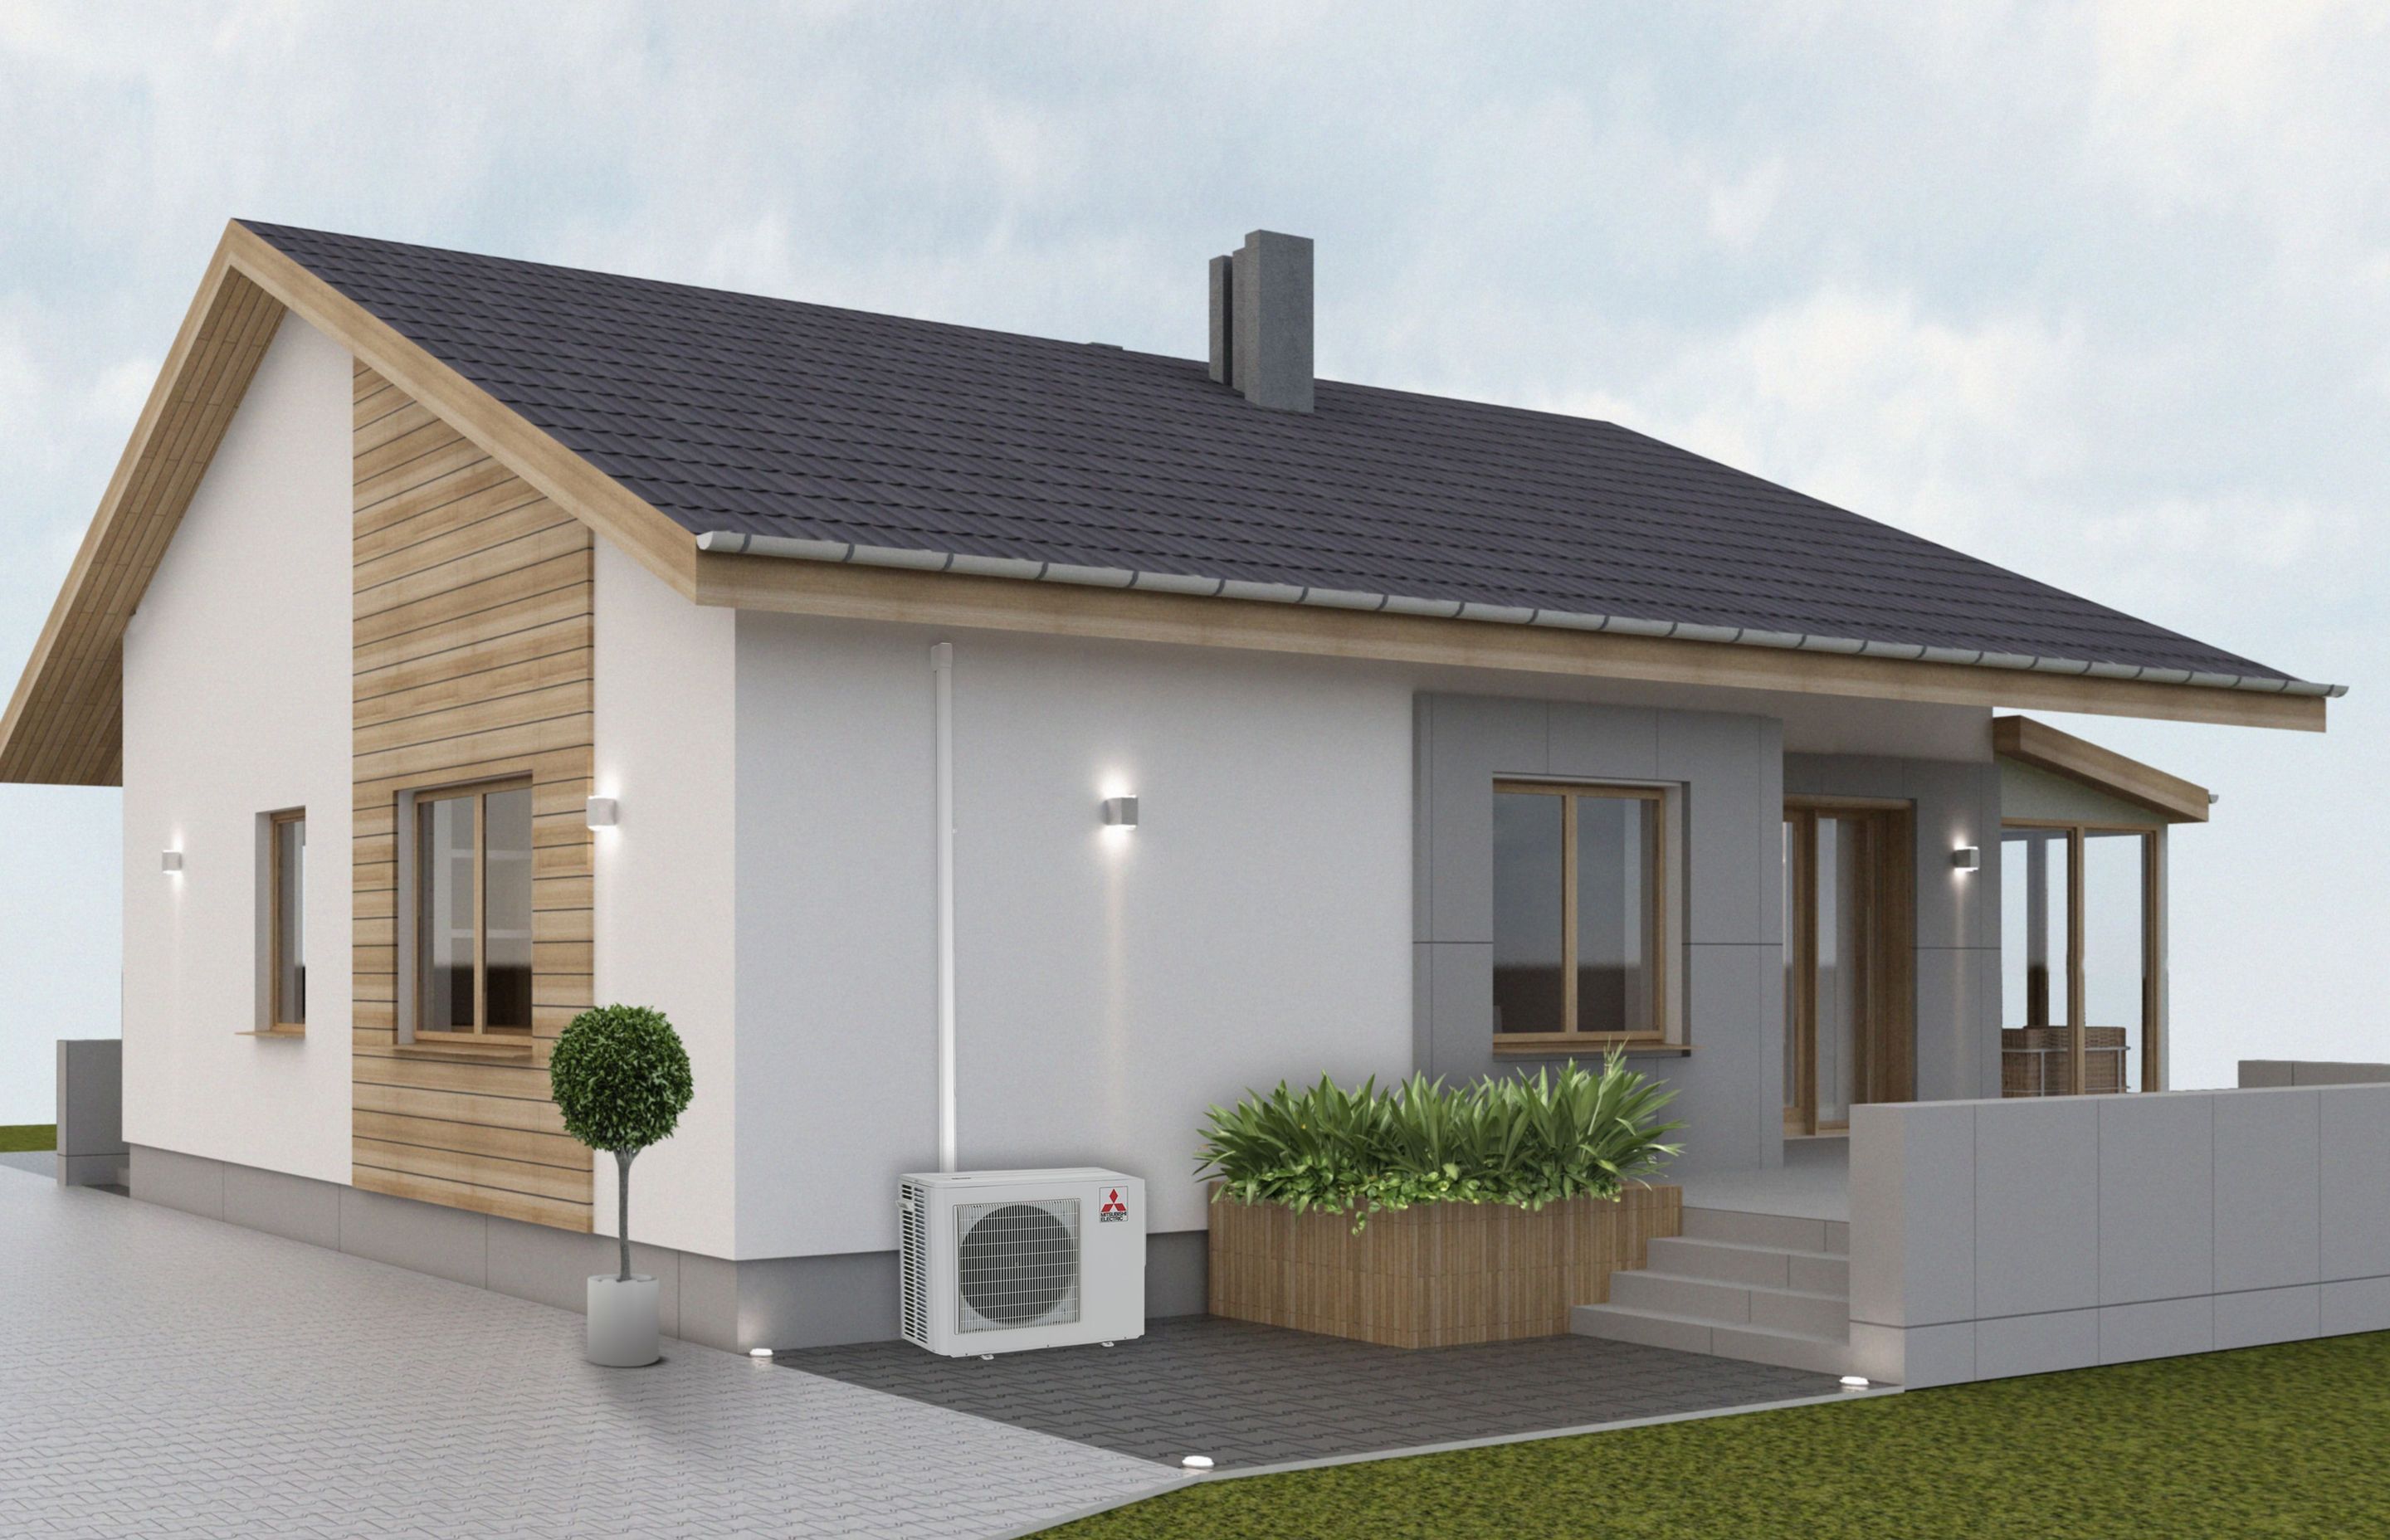 With the OmniCore Multi Room Heat Pump System you can heat your whole house and maintain its architectural integrity by only needing one outdoor unit to operate up to eight indoor units.